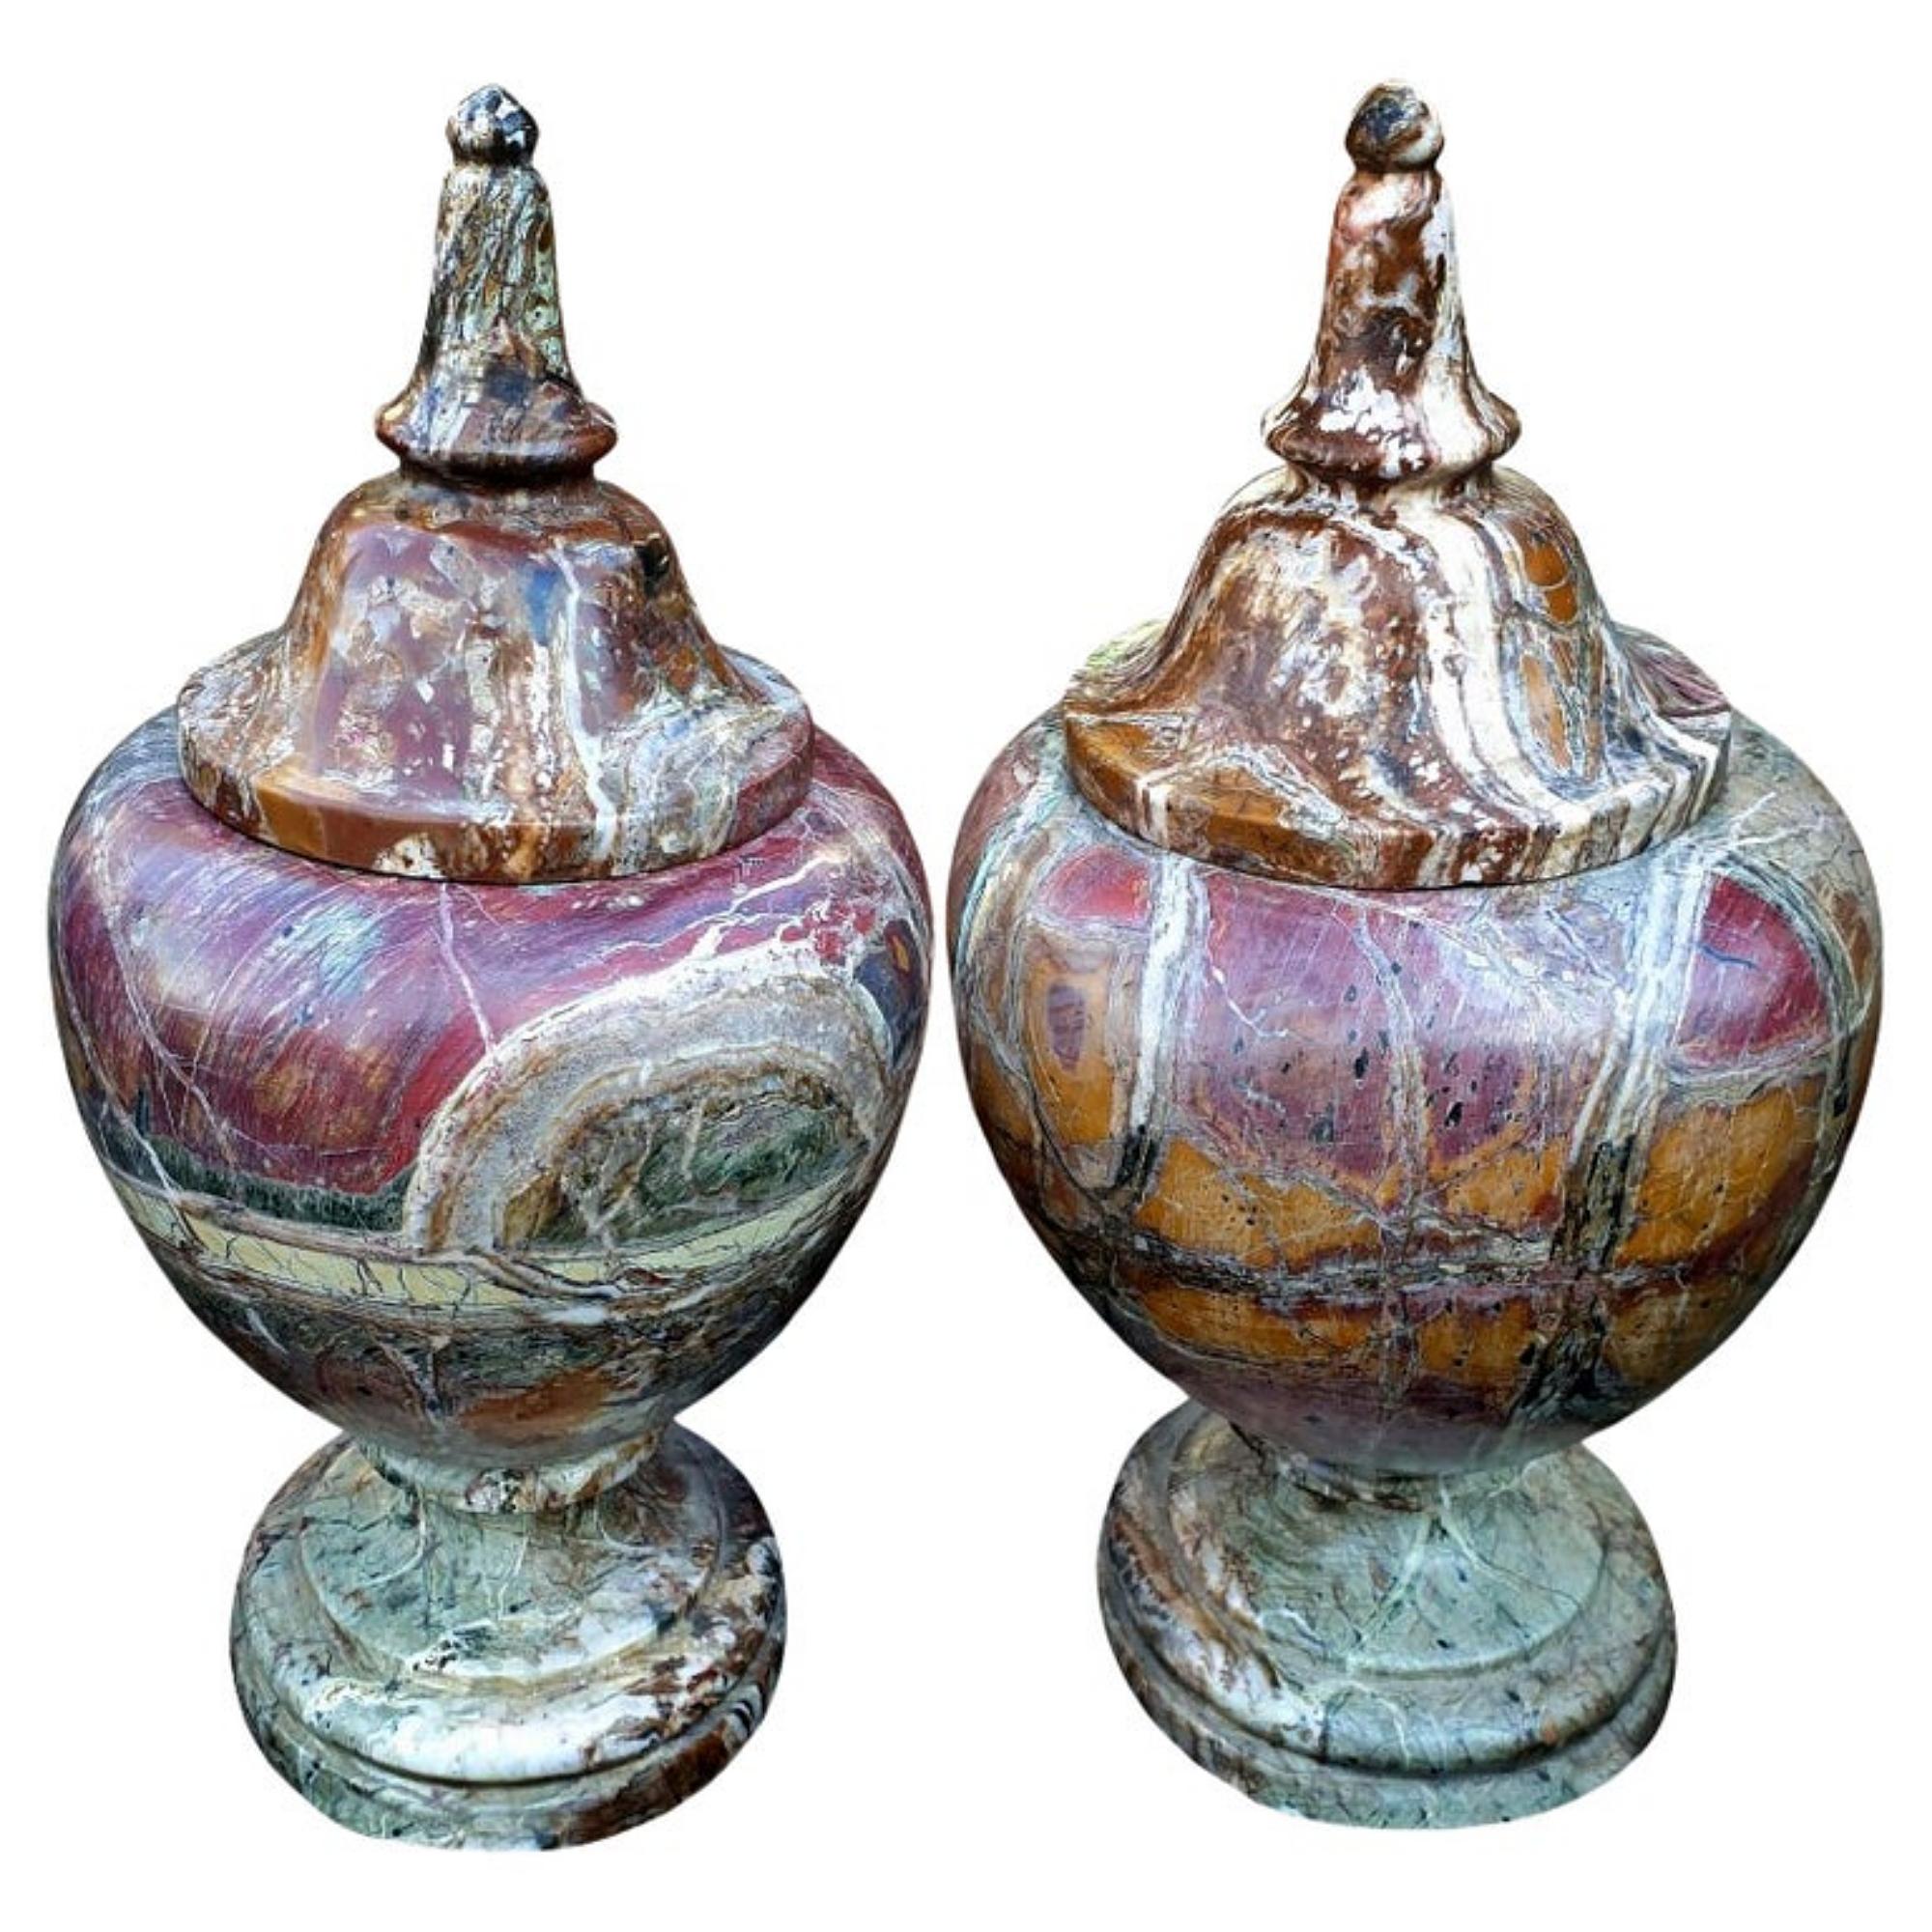 Amazing Pair of Turned Vases in Italian Diaspro Rosso Marble, Early 20th Century For Sale 1